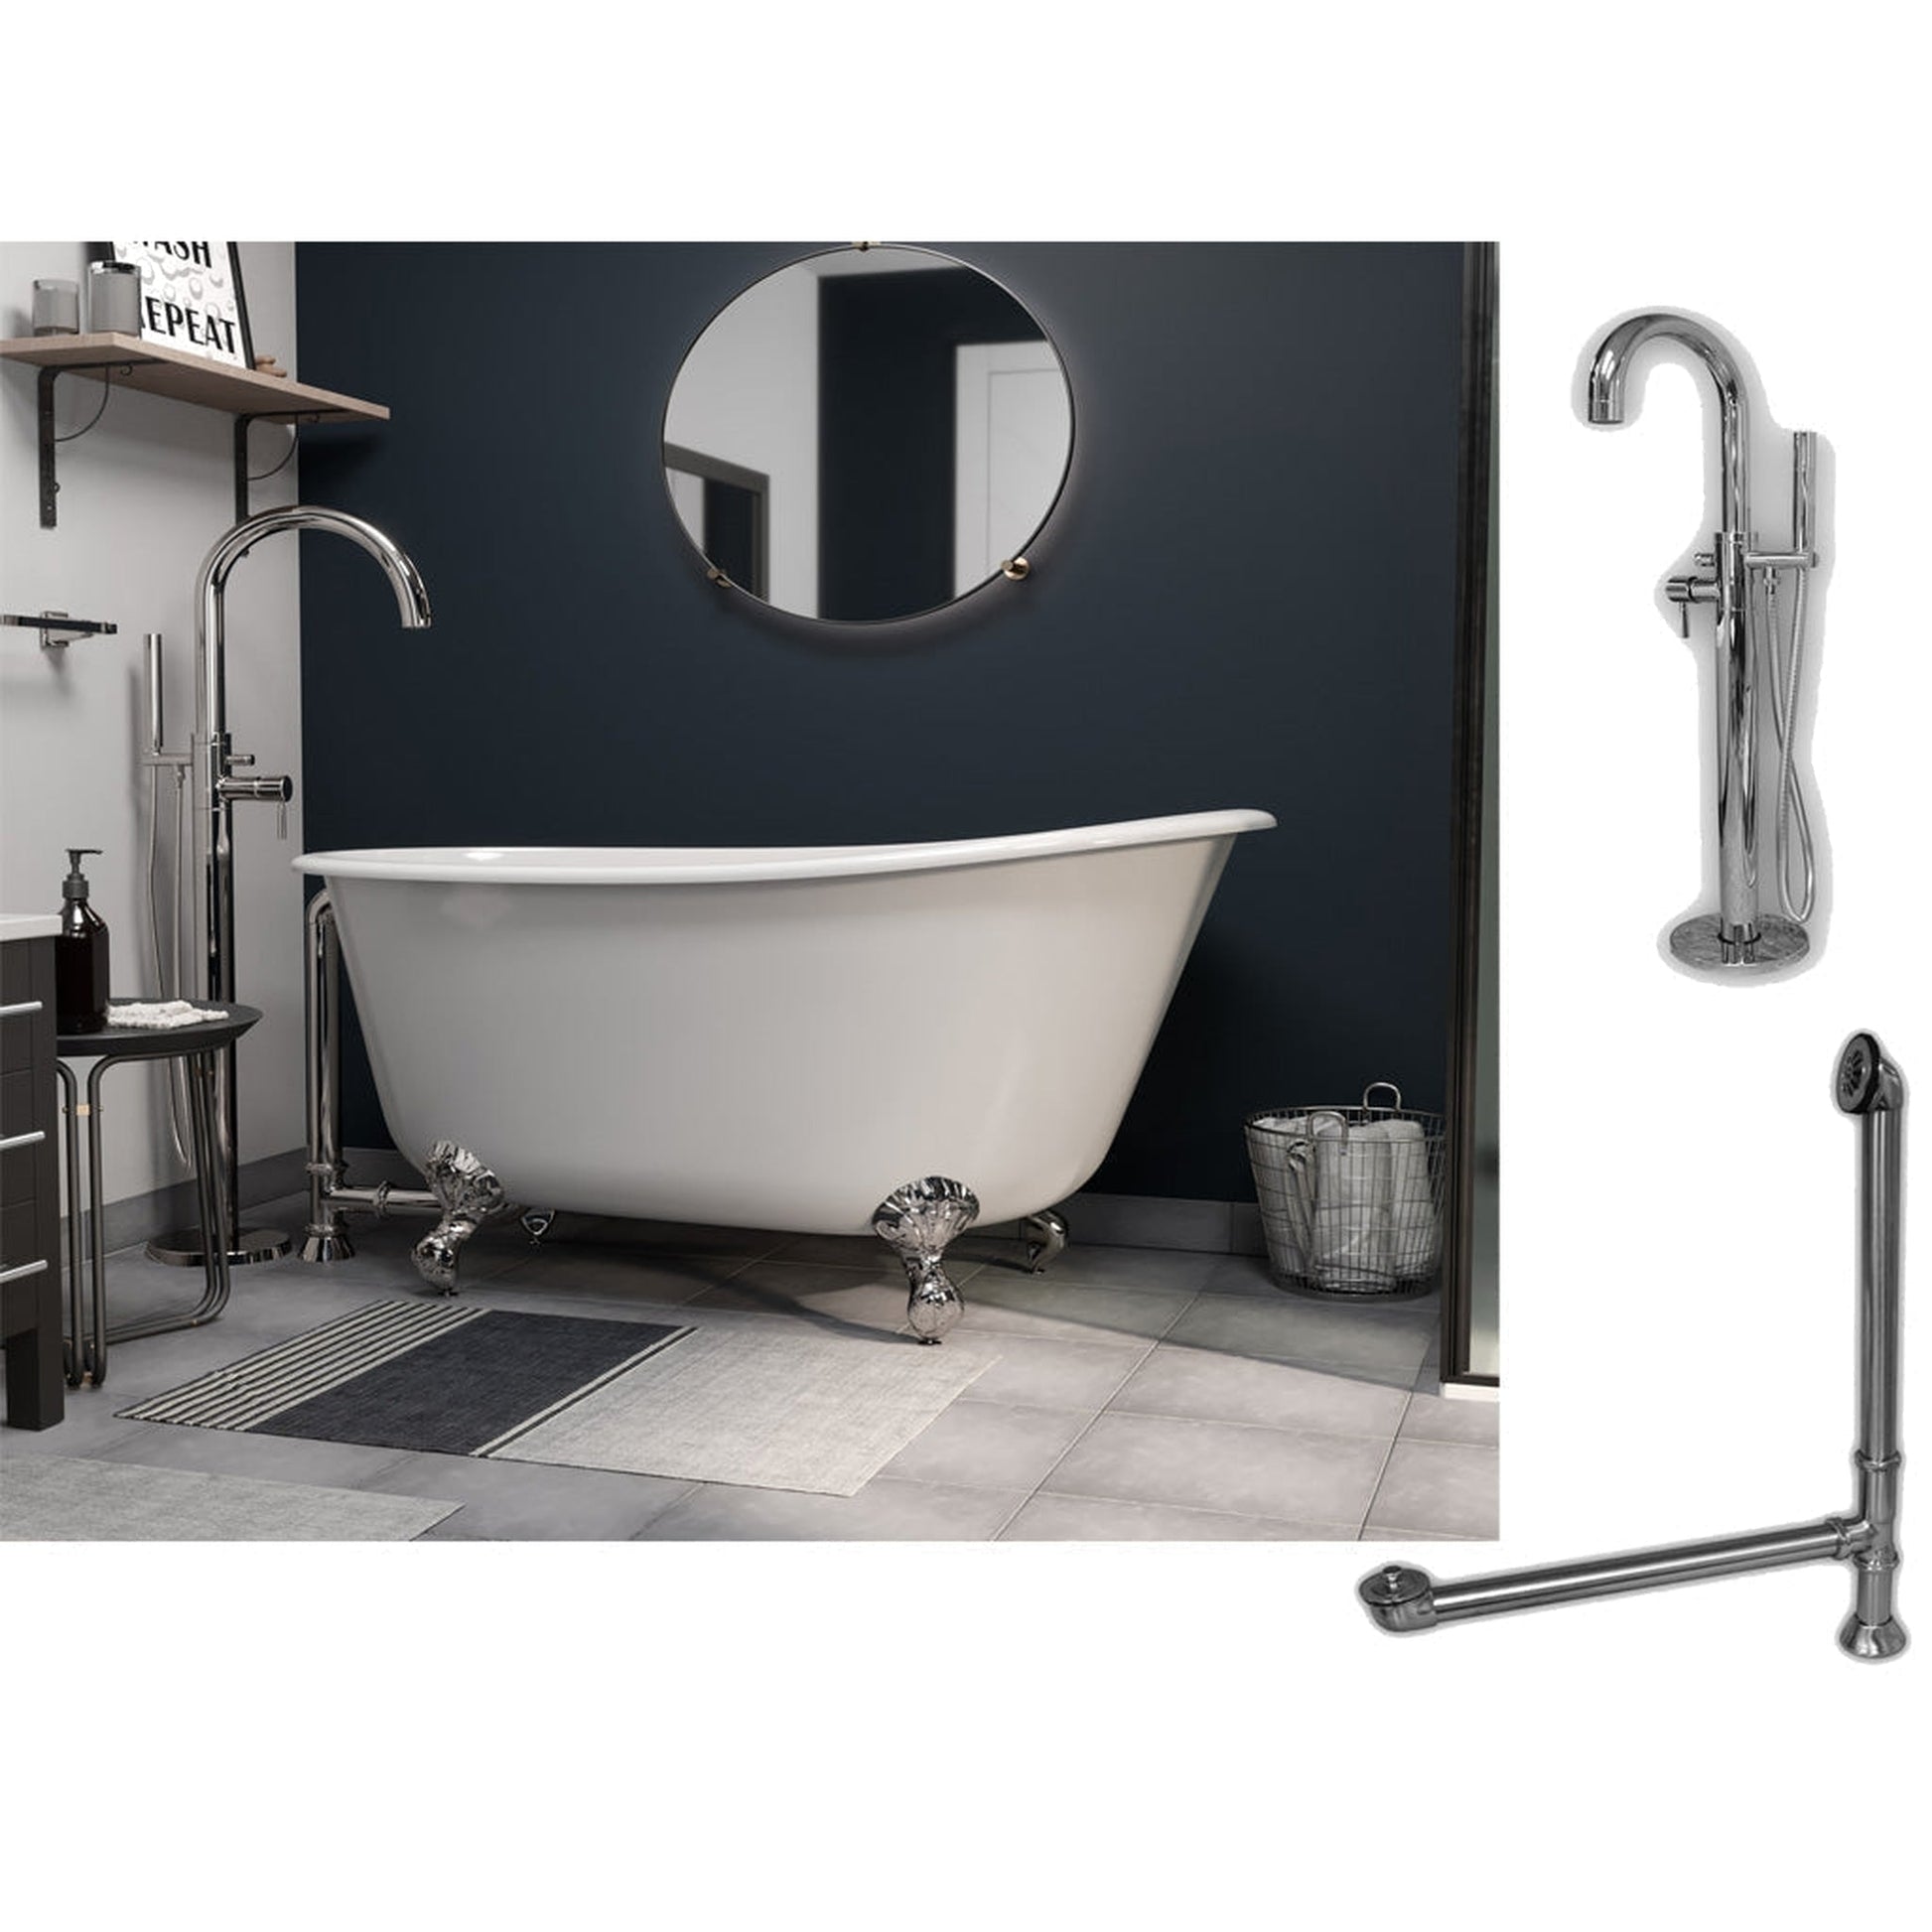 Cambridge Plumbing 54" White Cast Iron Swedish Single Slipper Clawfoot Bathtub With No Deck Holes And Complete Plumbing Package Including Modern Floor Mounted Faucet, Drain And Overflow Assembly In Polished Chrome